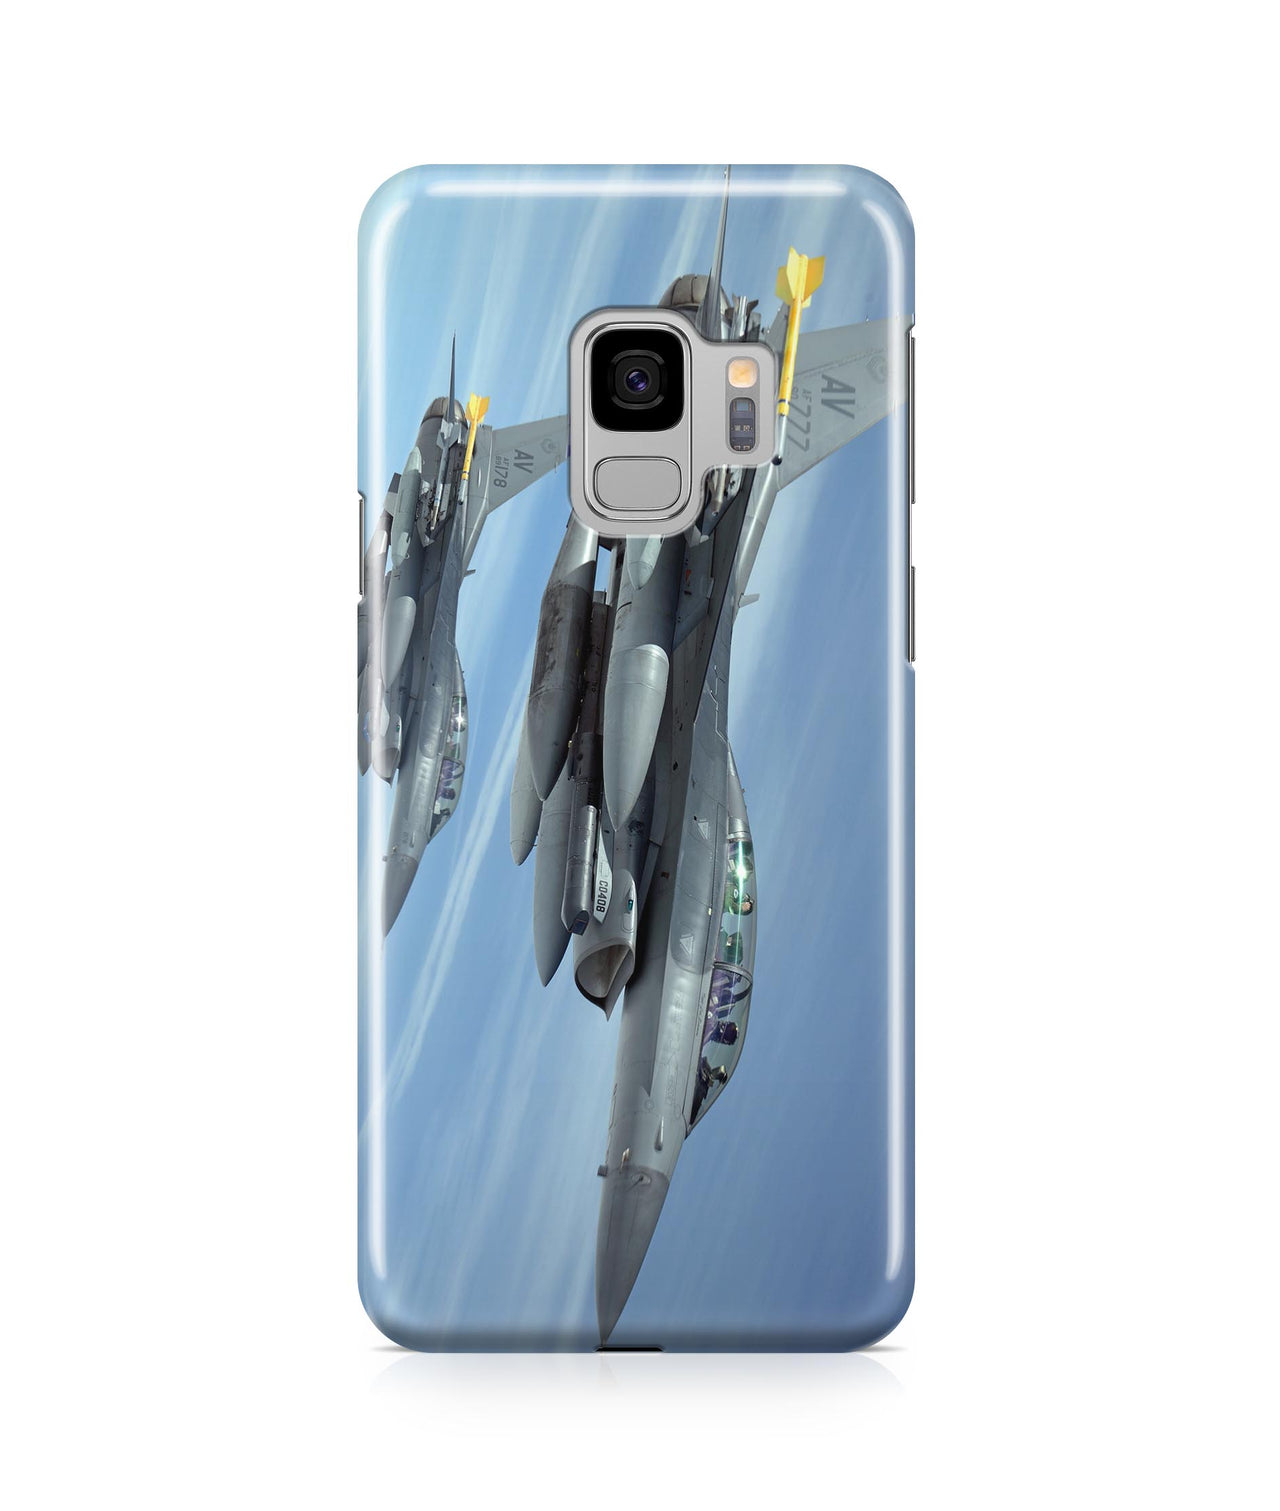 Two Fighting Falcon Printed Samsung J Cases